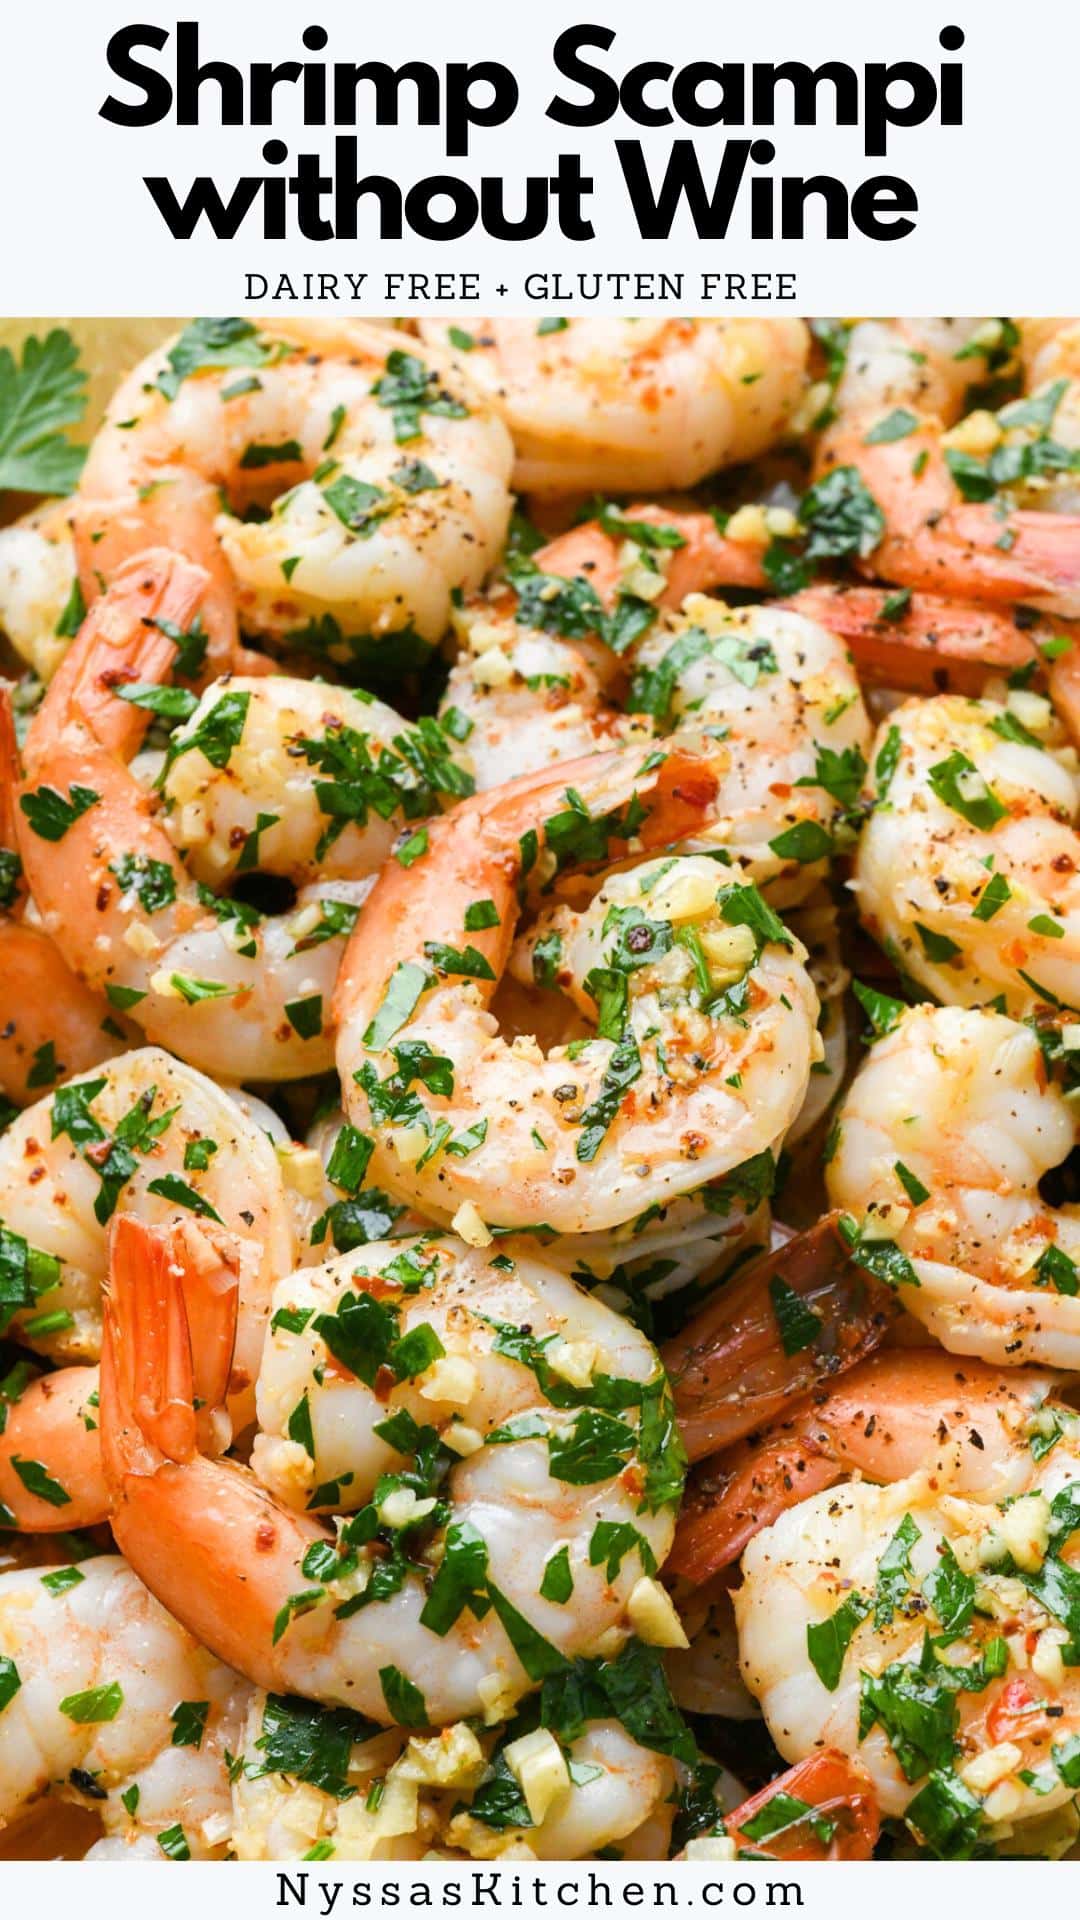 This recipe for shrimp scampi without wine is so easy to make from scratch! It is ready in just 20 minutes from start to finish. Cooked on the stovetop and made with tail on shrimp, olive oil, garlic, (optional) chili flakes, parsley, lemon juice, and broth. It pairs perfectly with your favorite pasta but is also delicious served on its own with a side dish or as an appetizer. A healthy recipe that is gluten free, dairy free, and bursting with flavor!